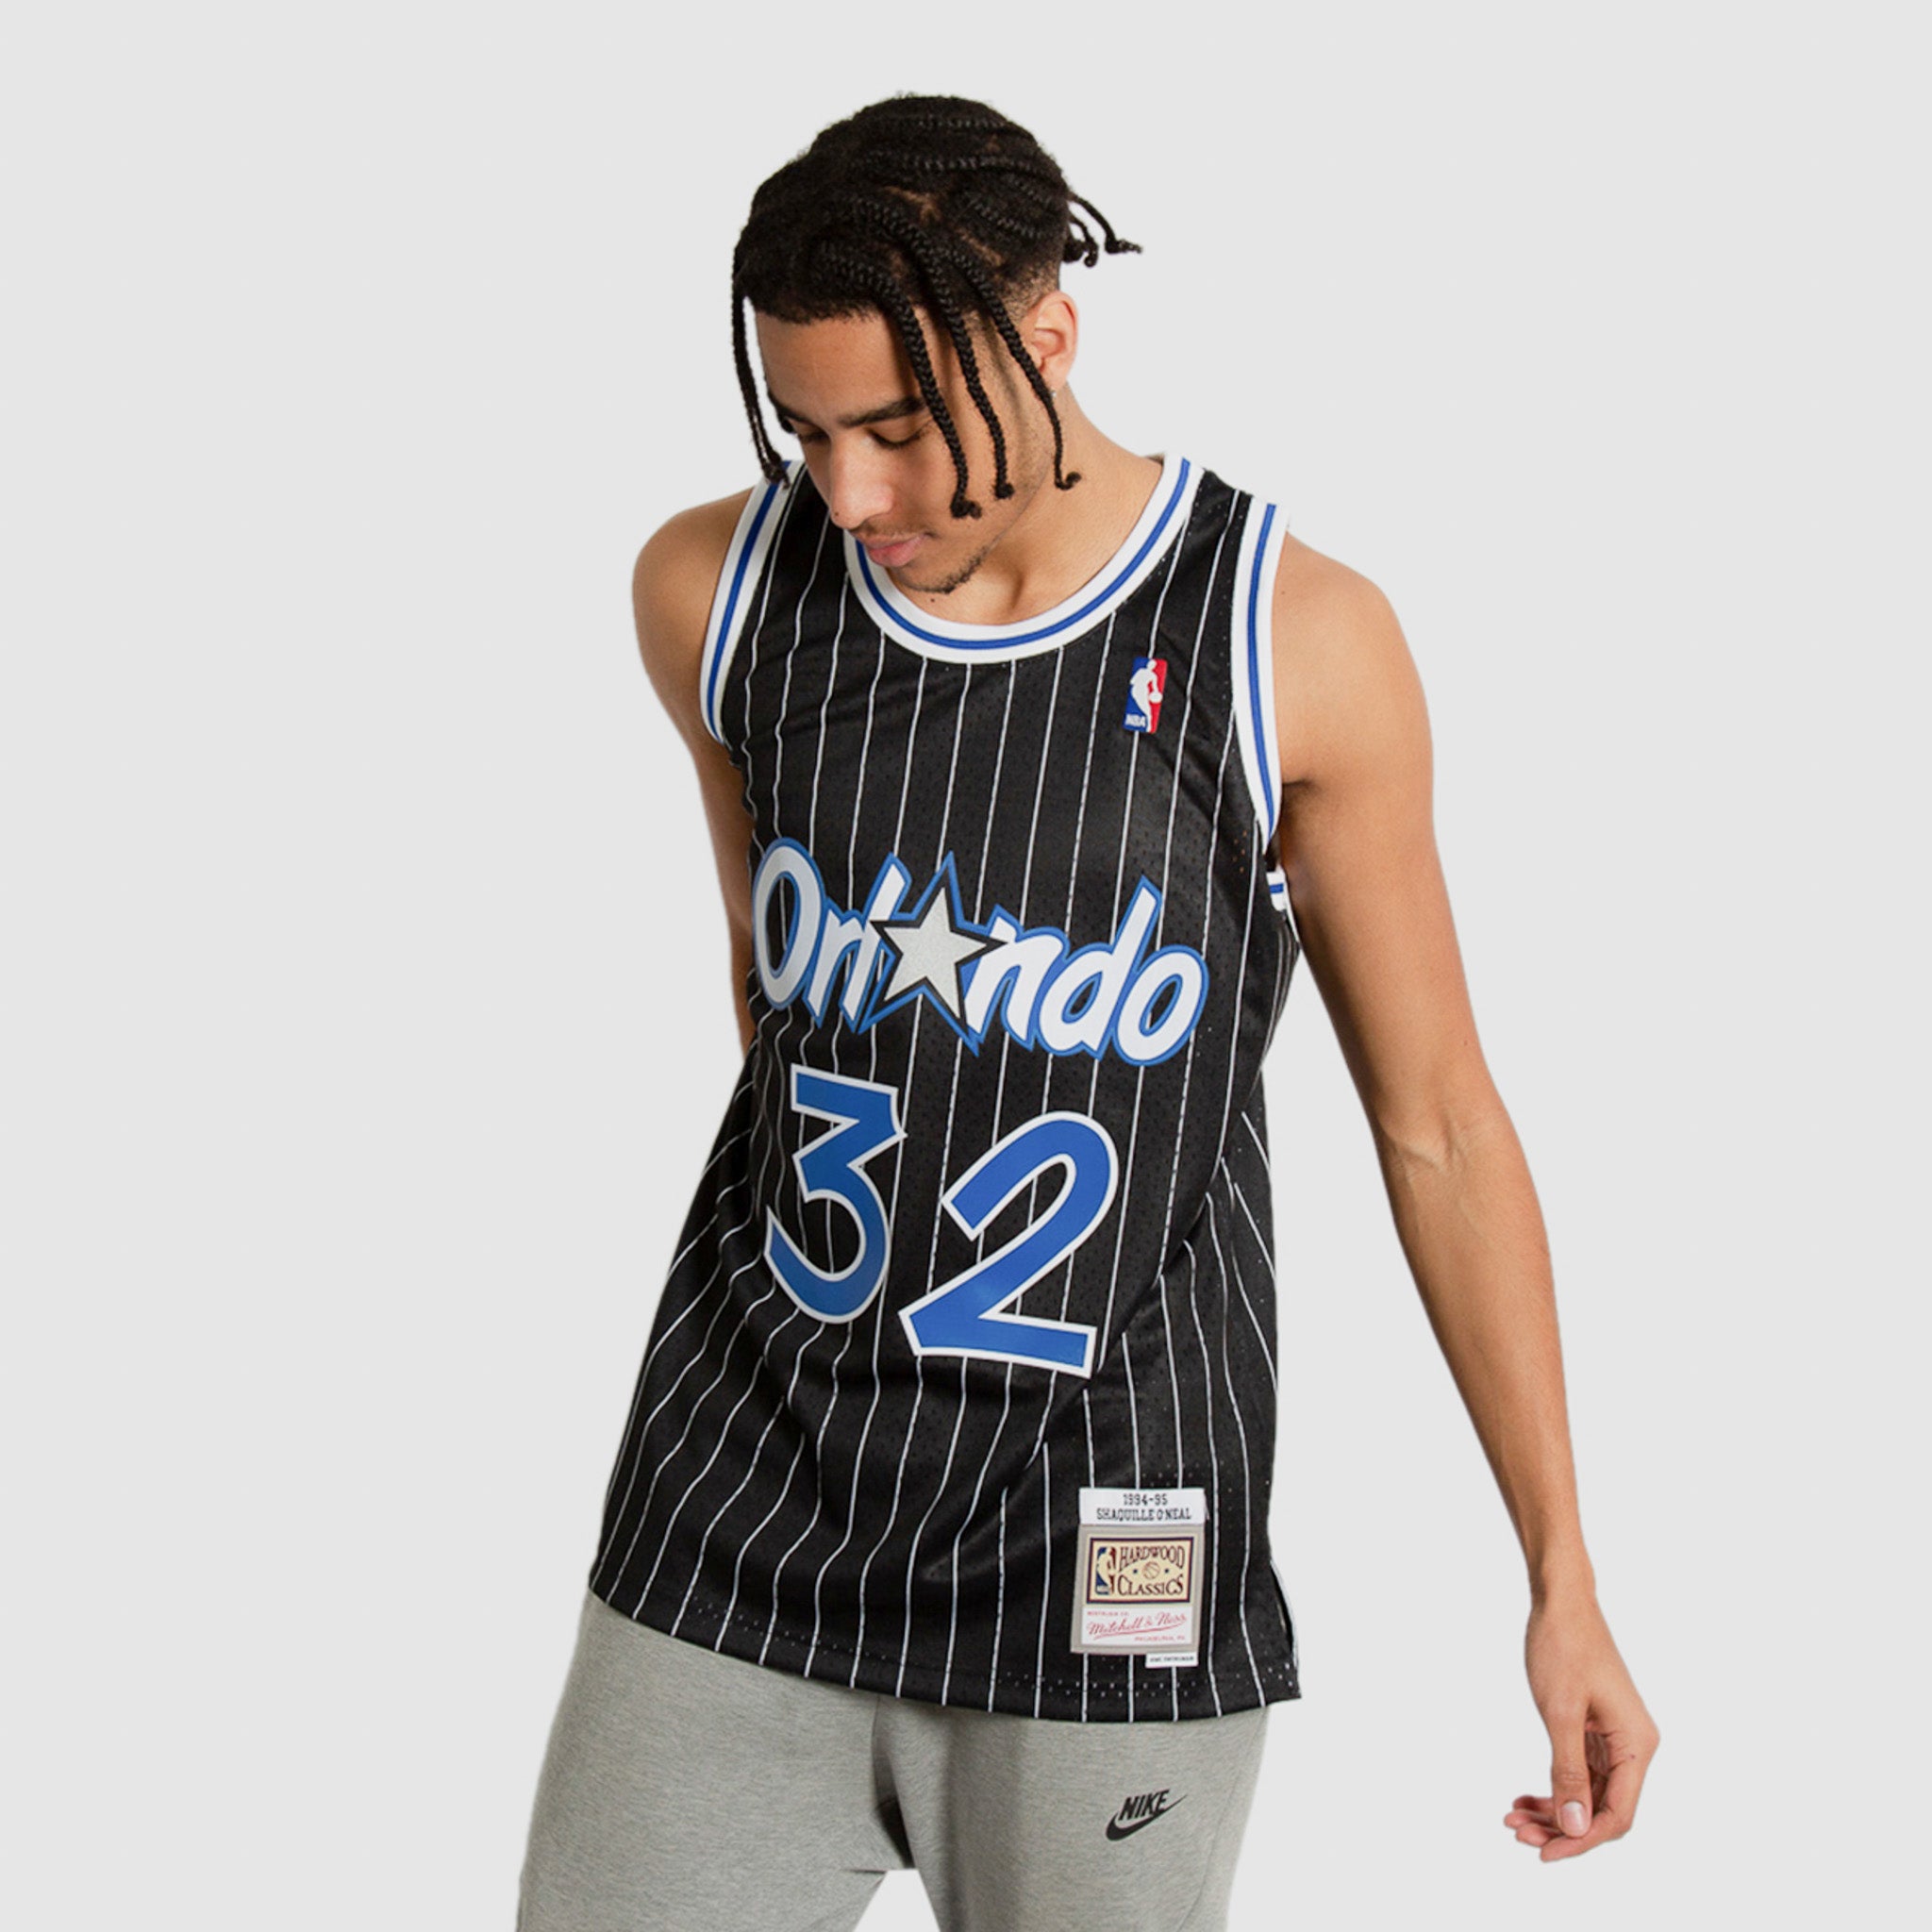  Orlando Magic Shaquille O'Neal Youth Swingman Jersey (YTH :  Clothing, Shoes & Jewelry